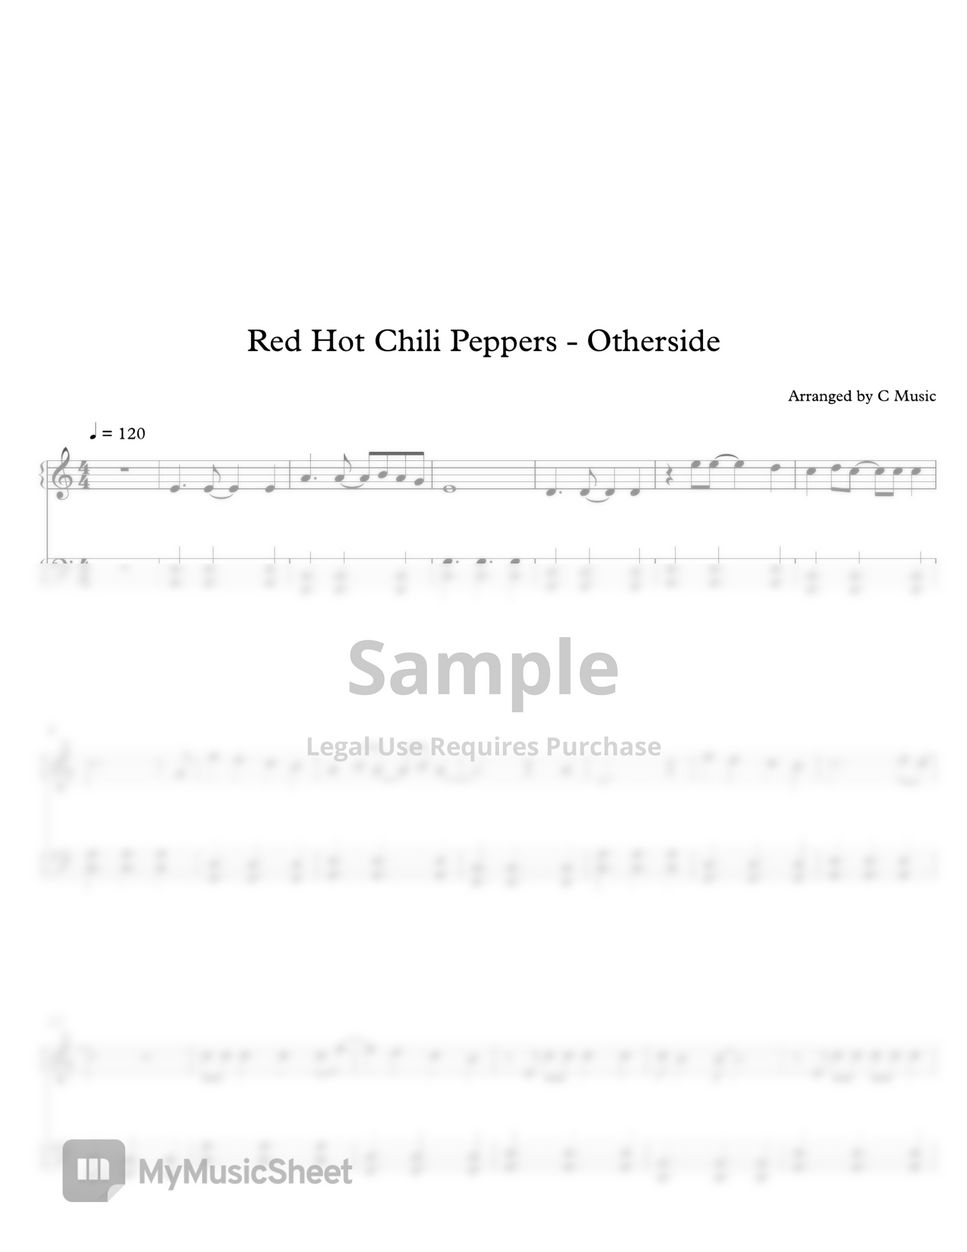 Red Hot Chili Peppers - Otherside by C Music